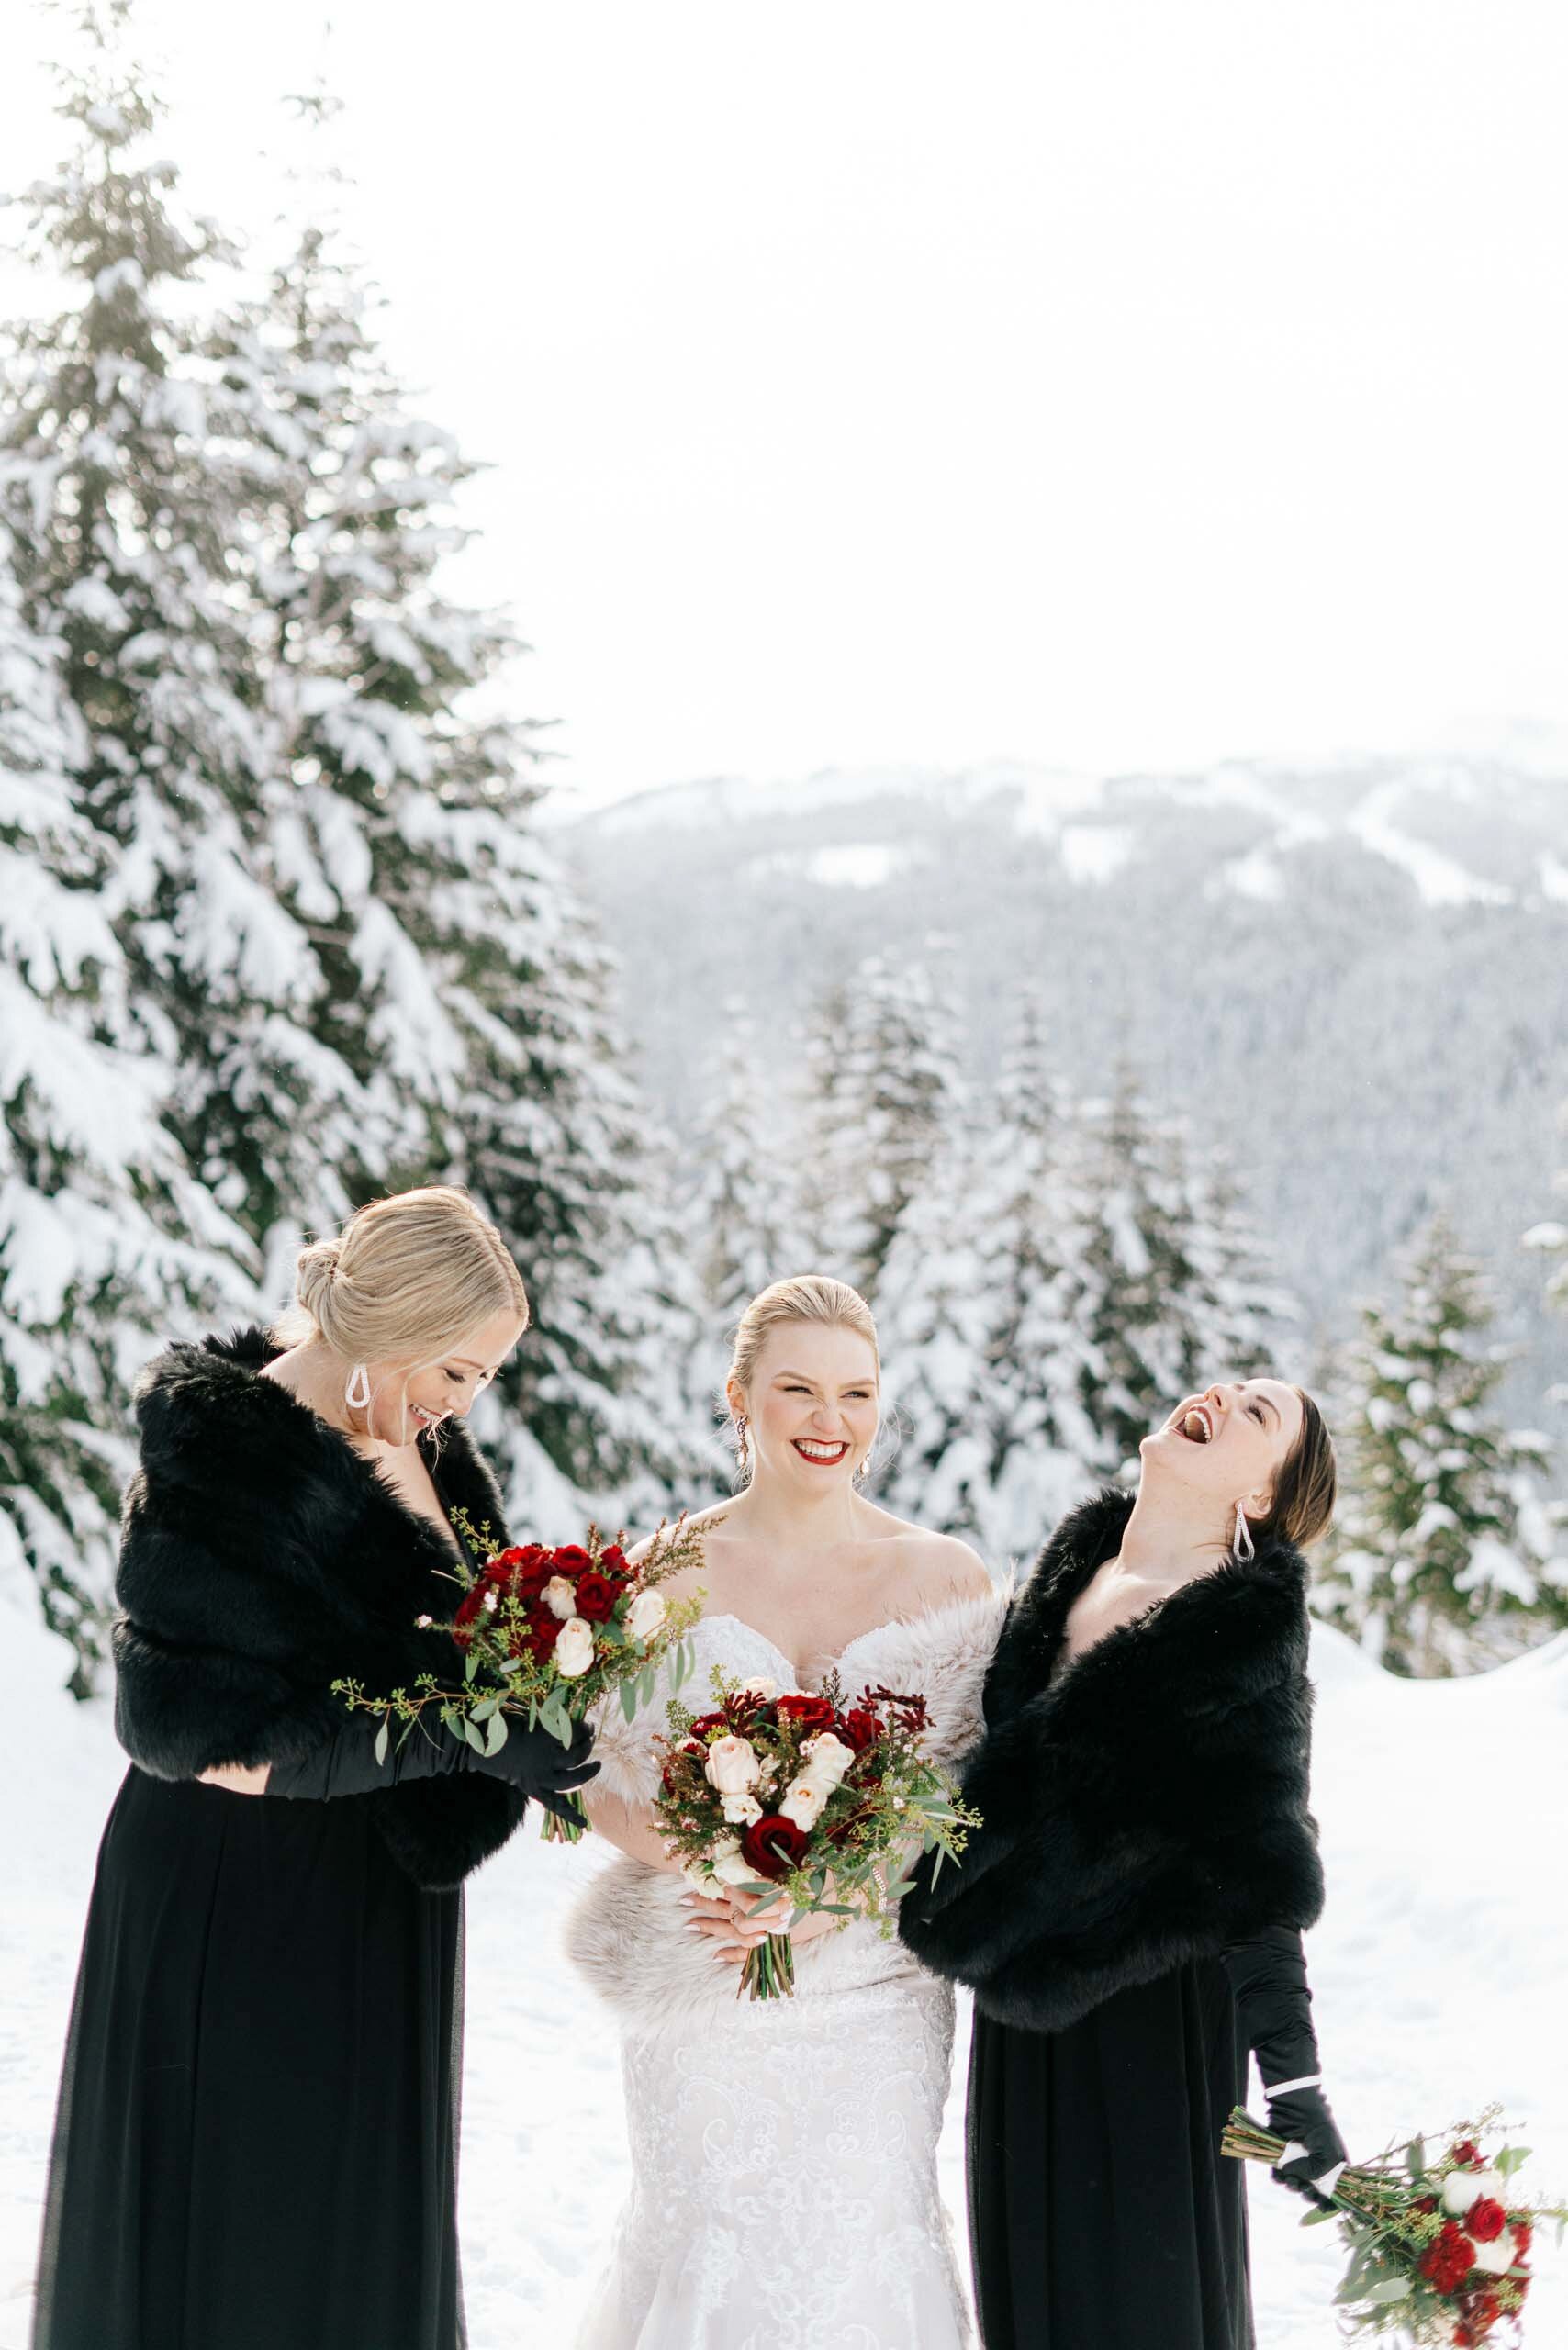 Bridesmaids in matching black fur stoles laugh with the bride as they enjoy the cool outdoor weather. 